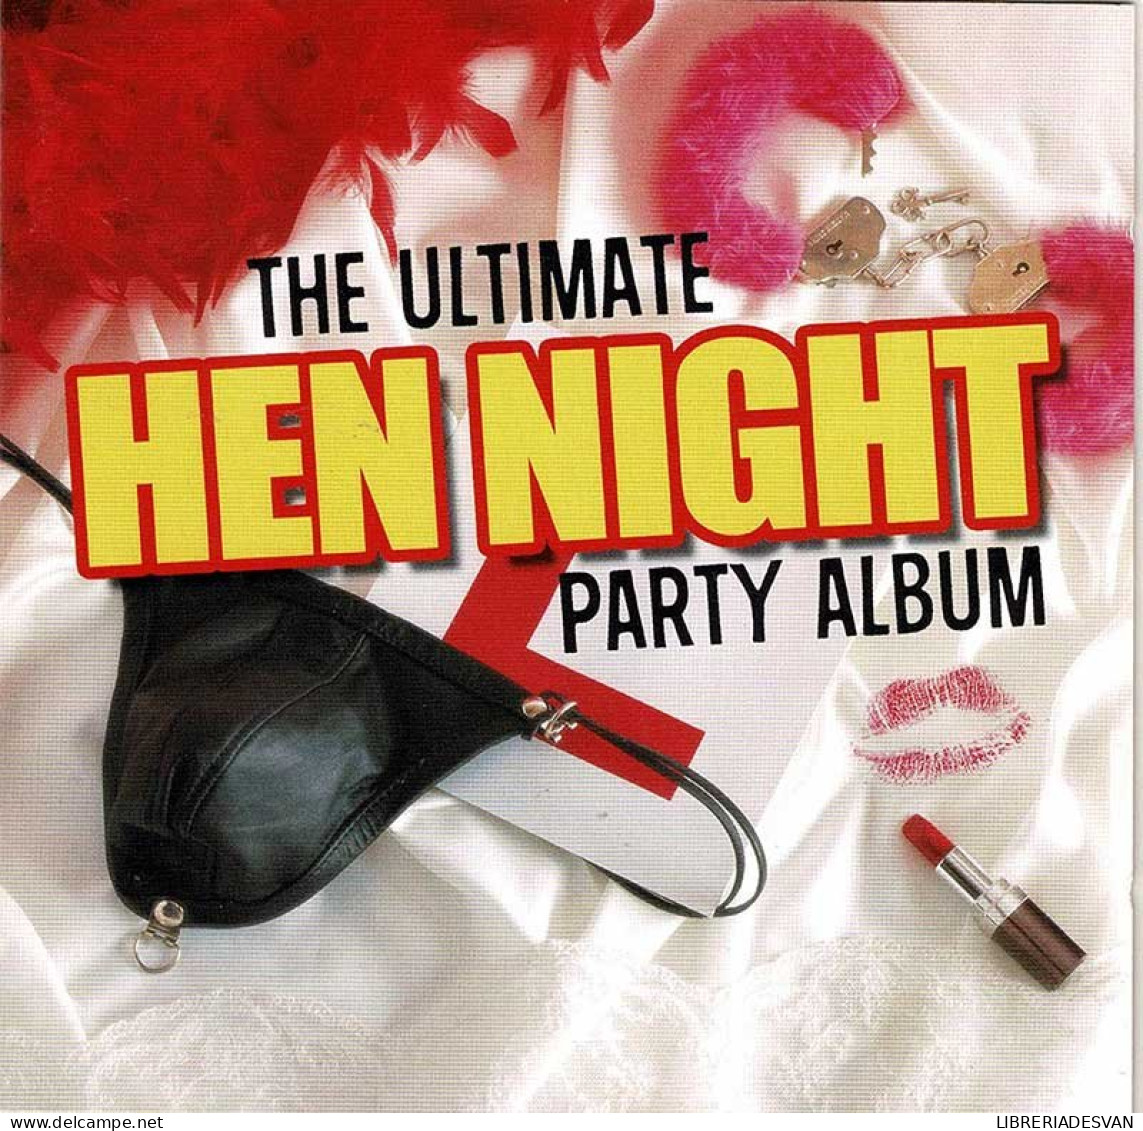 The Ultimate Hen Night Party Album. 2 X CD - Dance, Techno & House